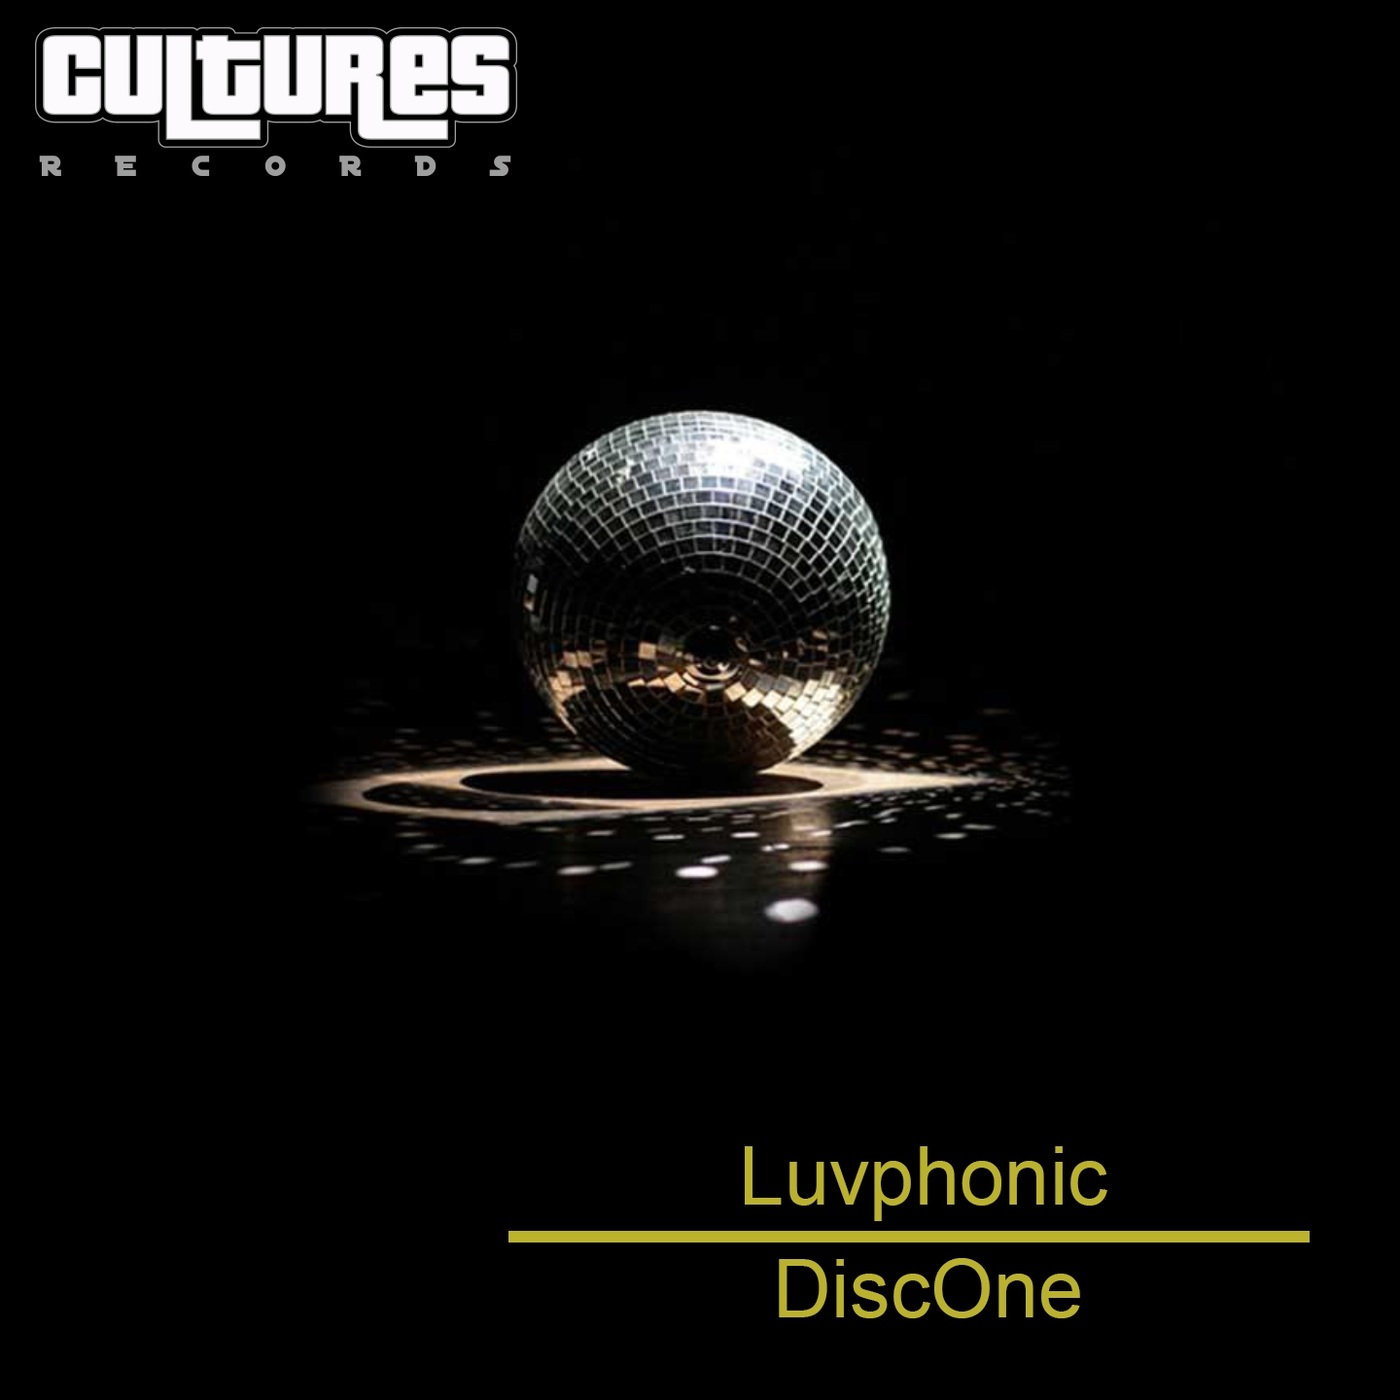 Luvphonic - DiscOne / Cultures Records